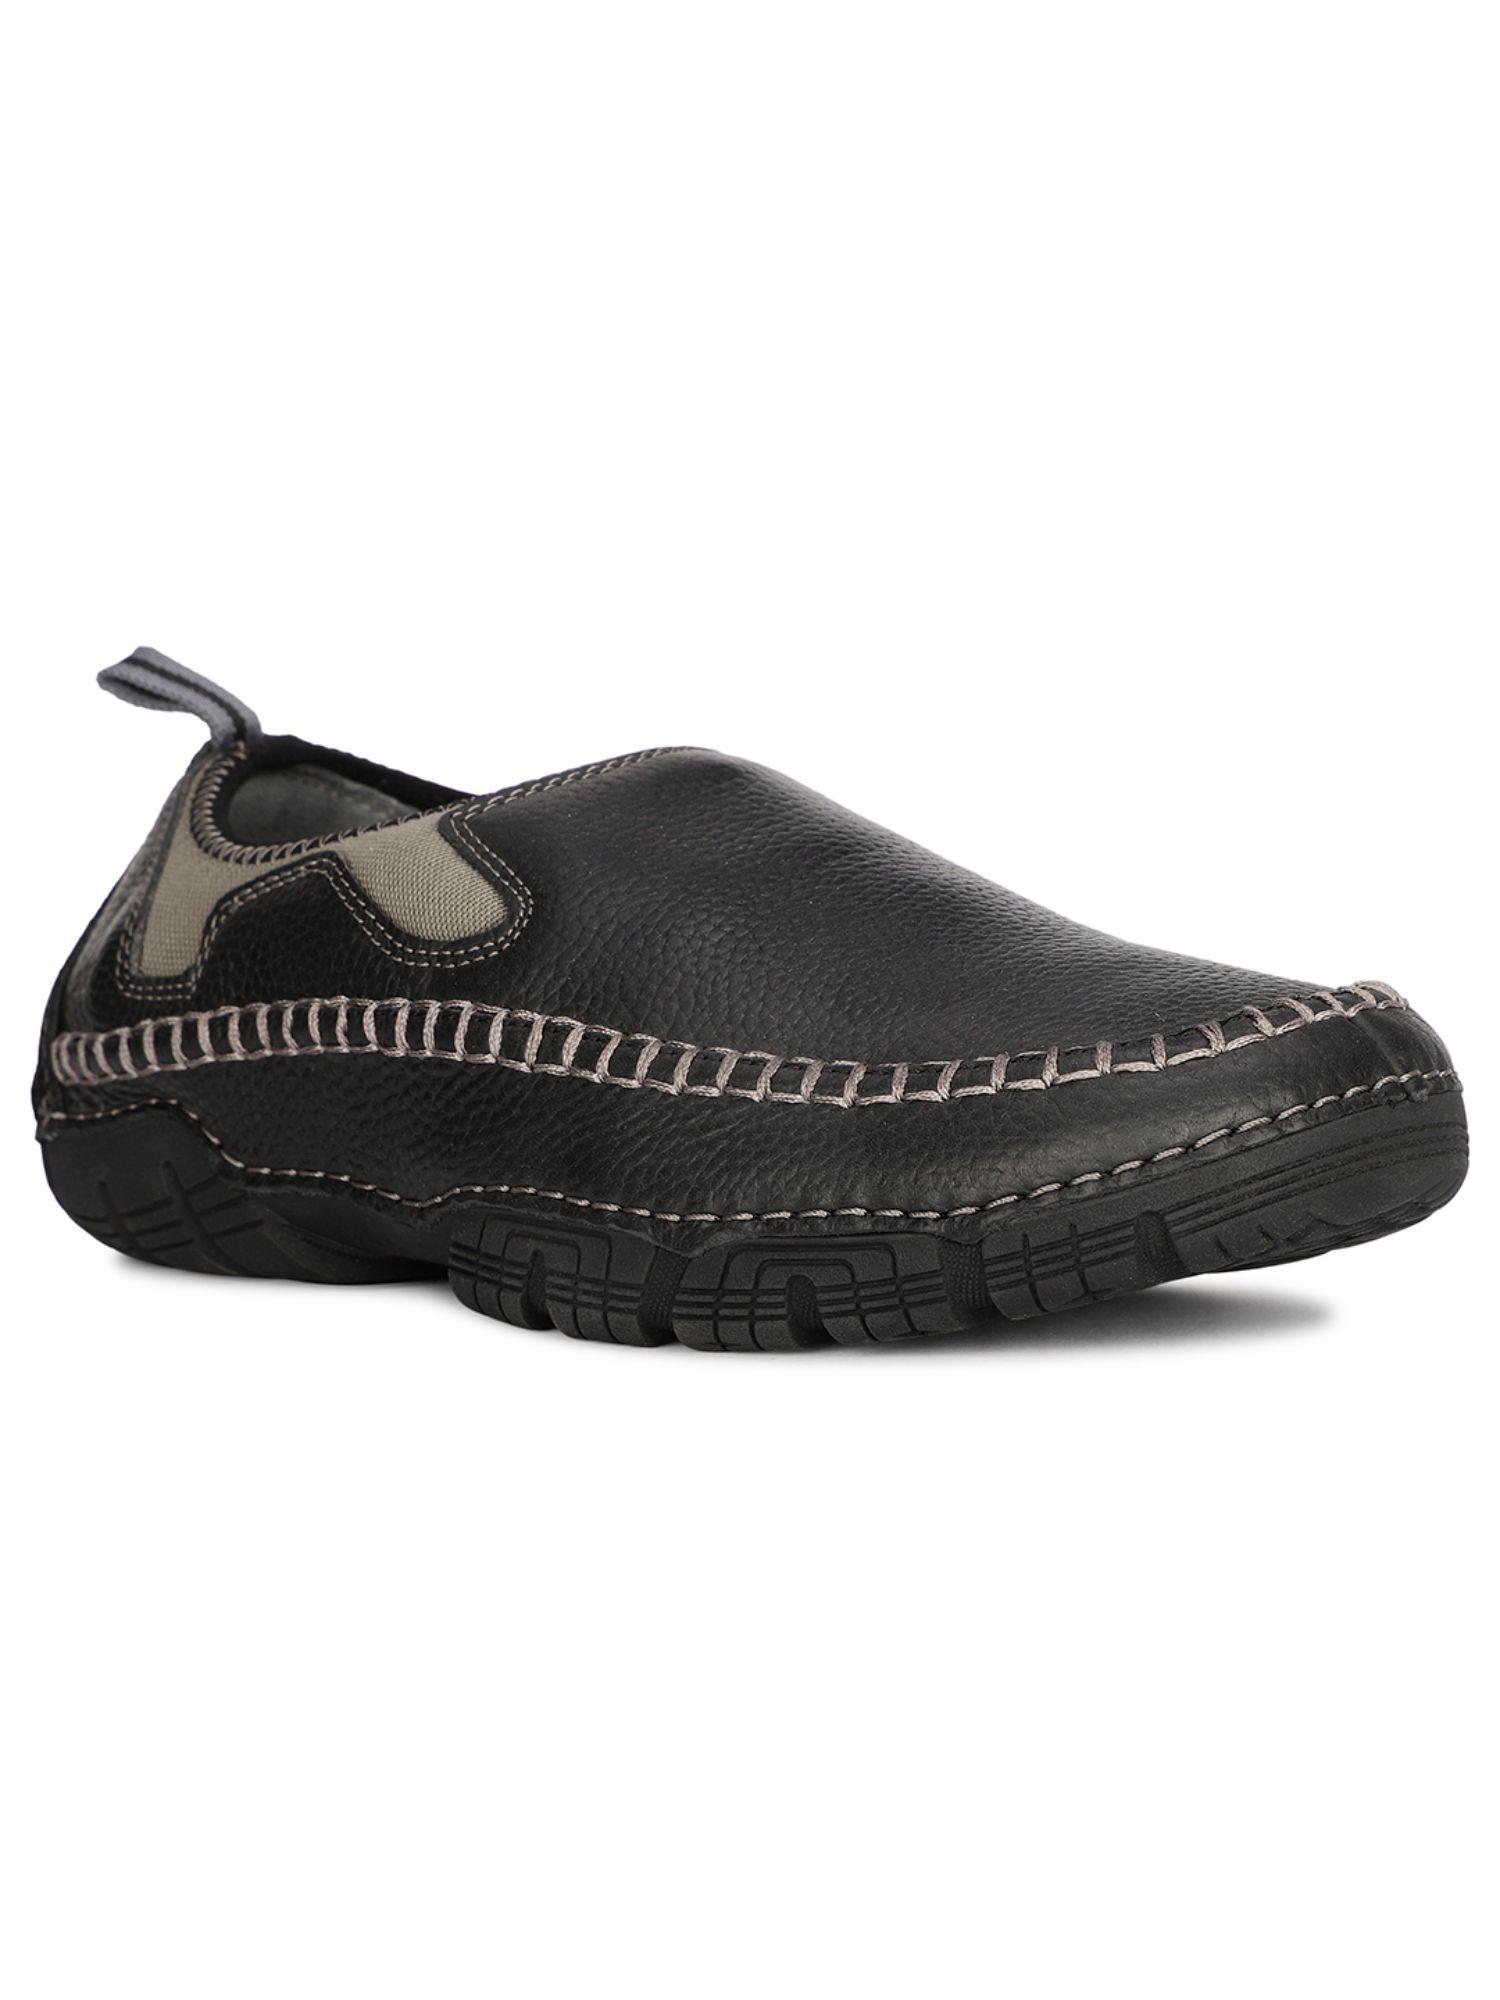 mens black slip on casual loafers